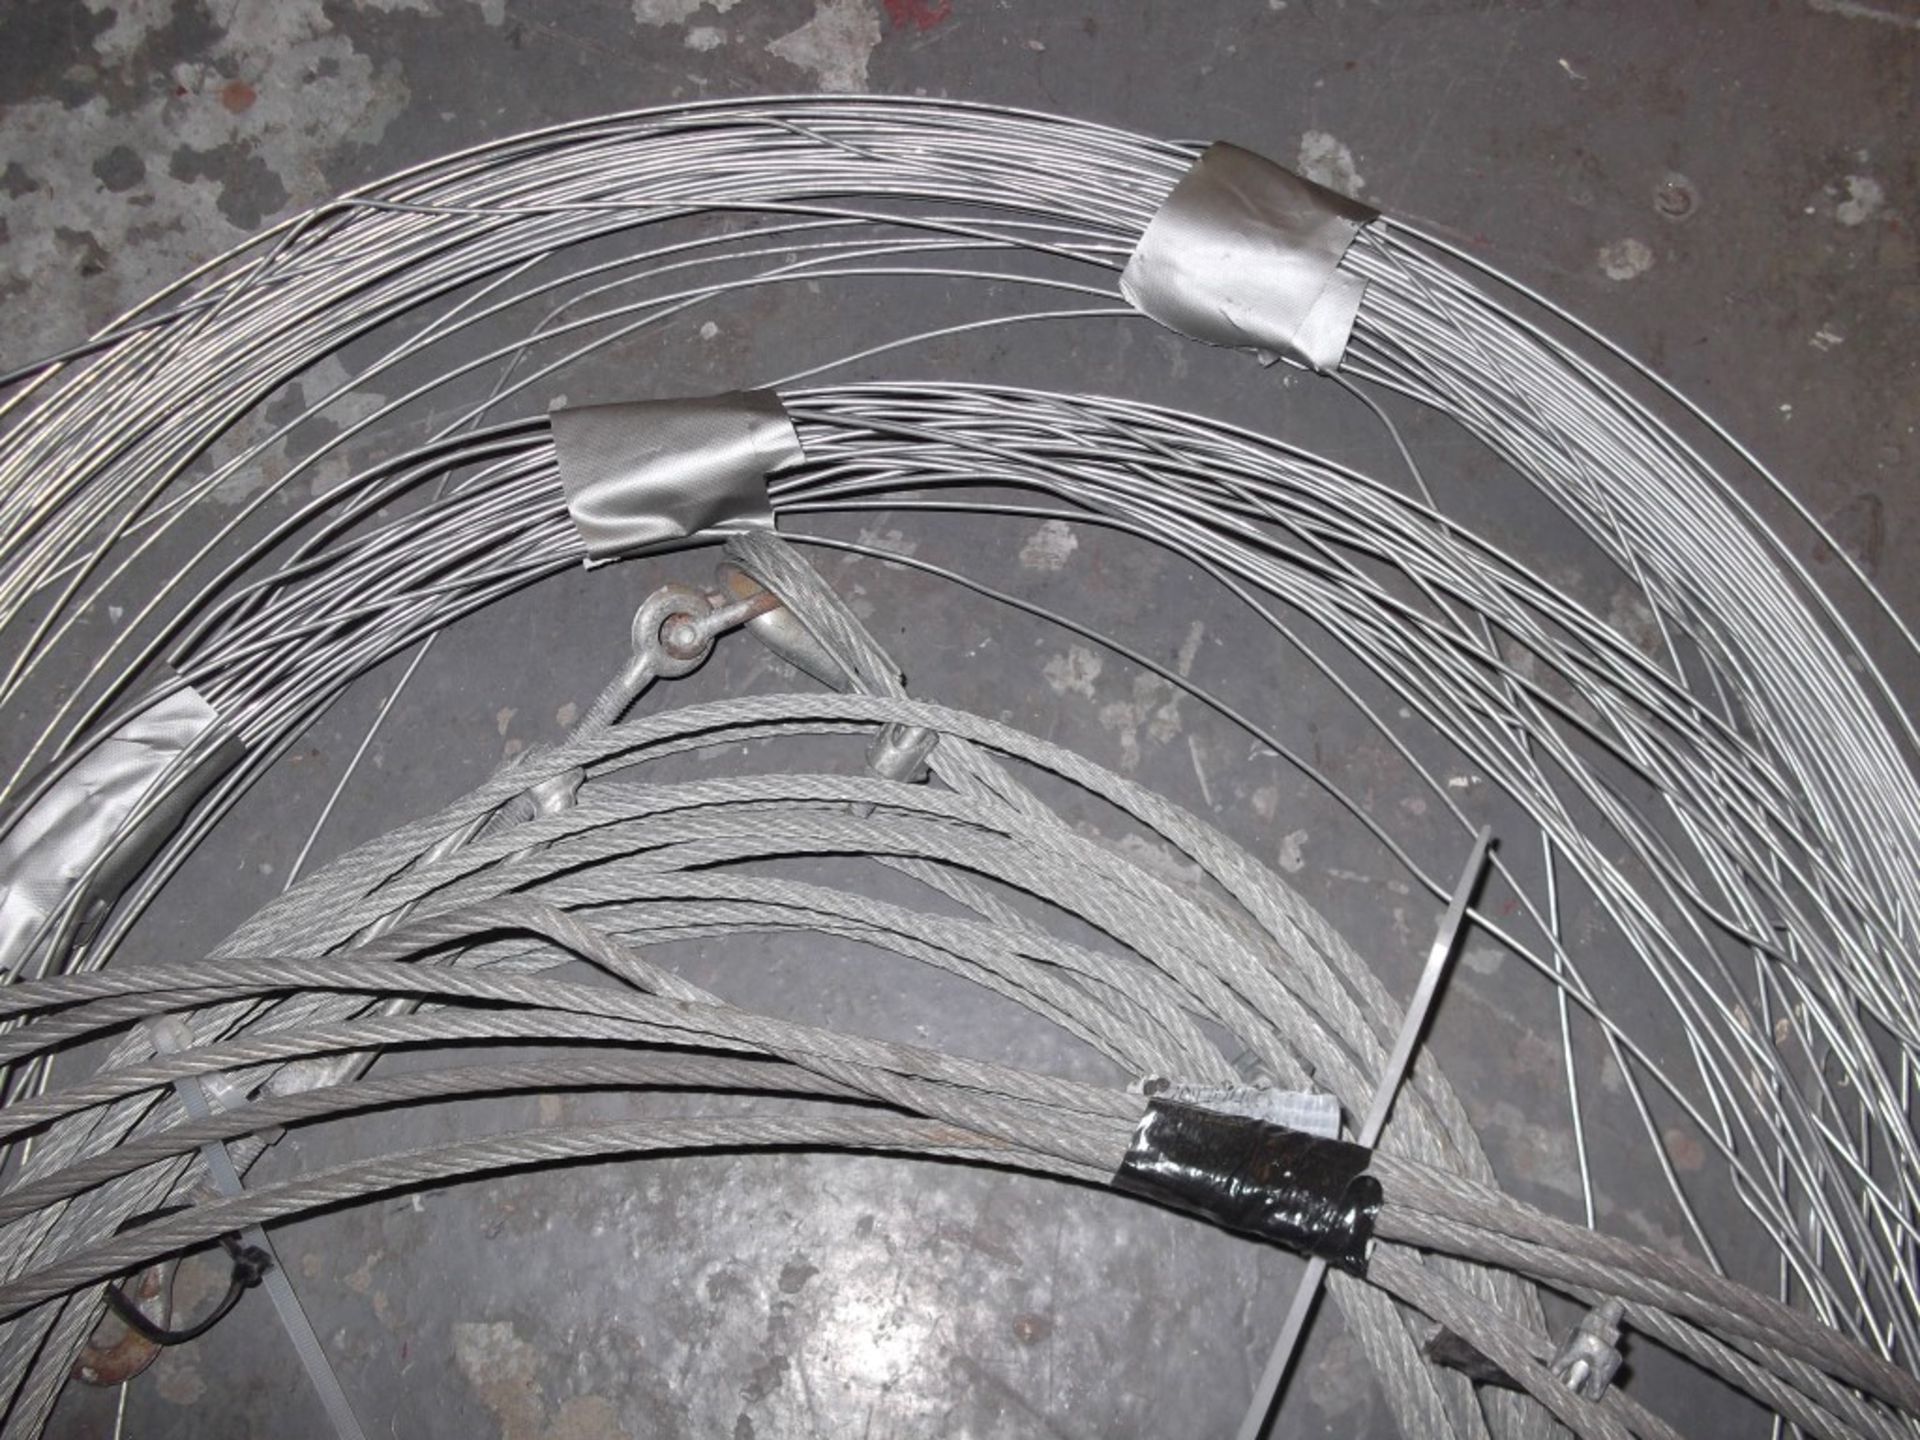 9 x Assorted Coils Of Catenary Wire - Supplied In A Variety Of Thicknesses And Lengths, Most With - Image 3 of 5